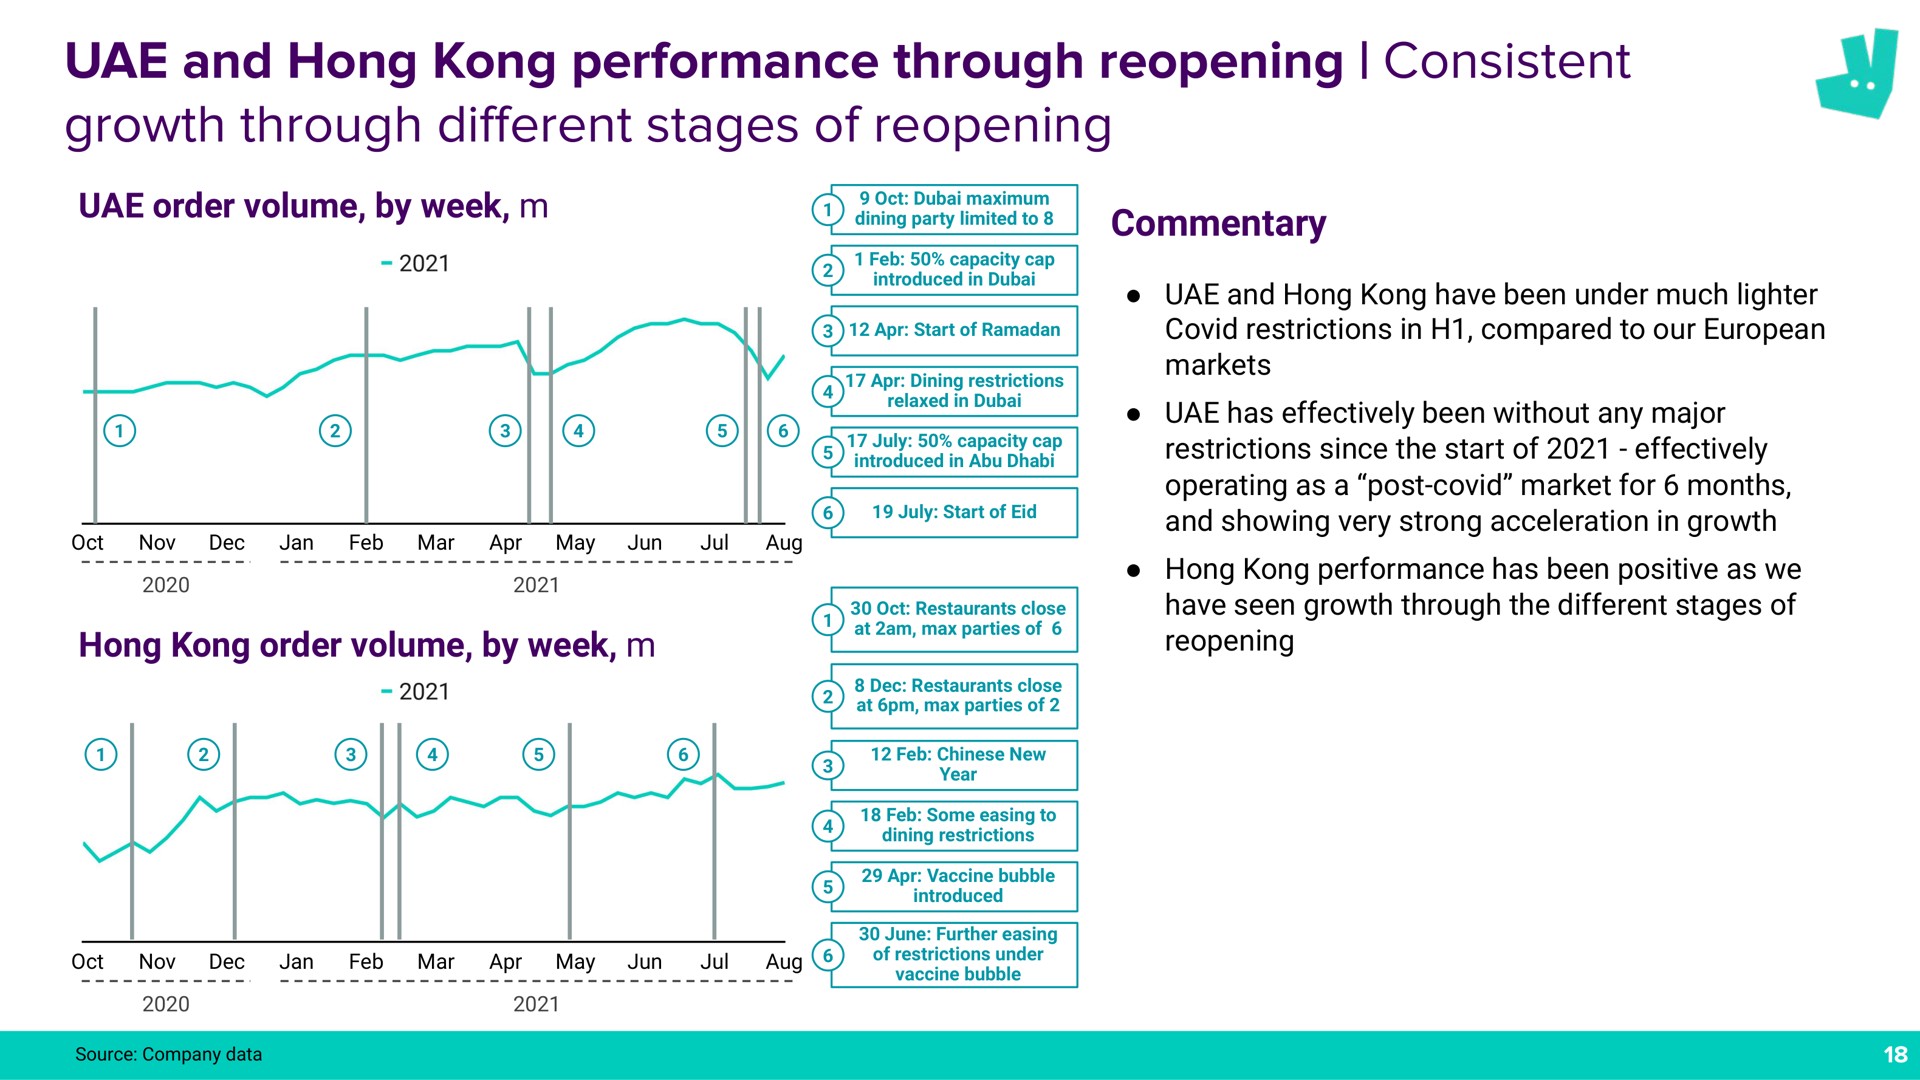 and hong performance through reopening consistent growth through stages of reopening different | Deliveroo